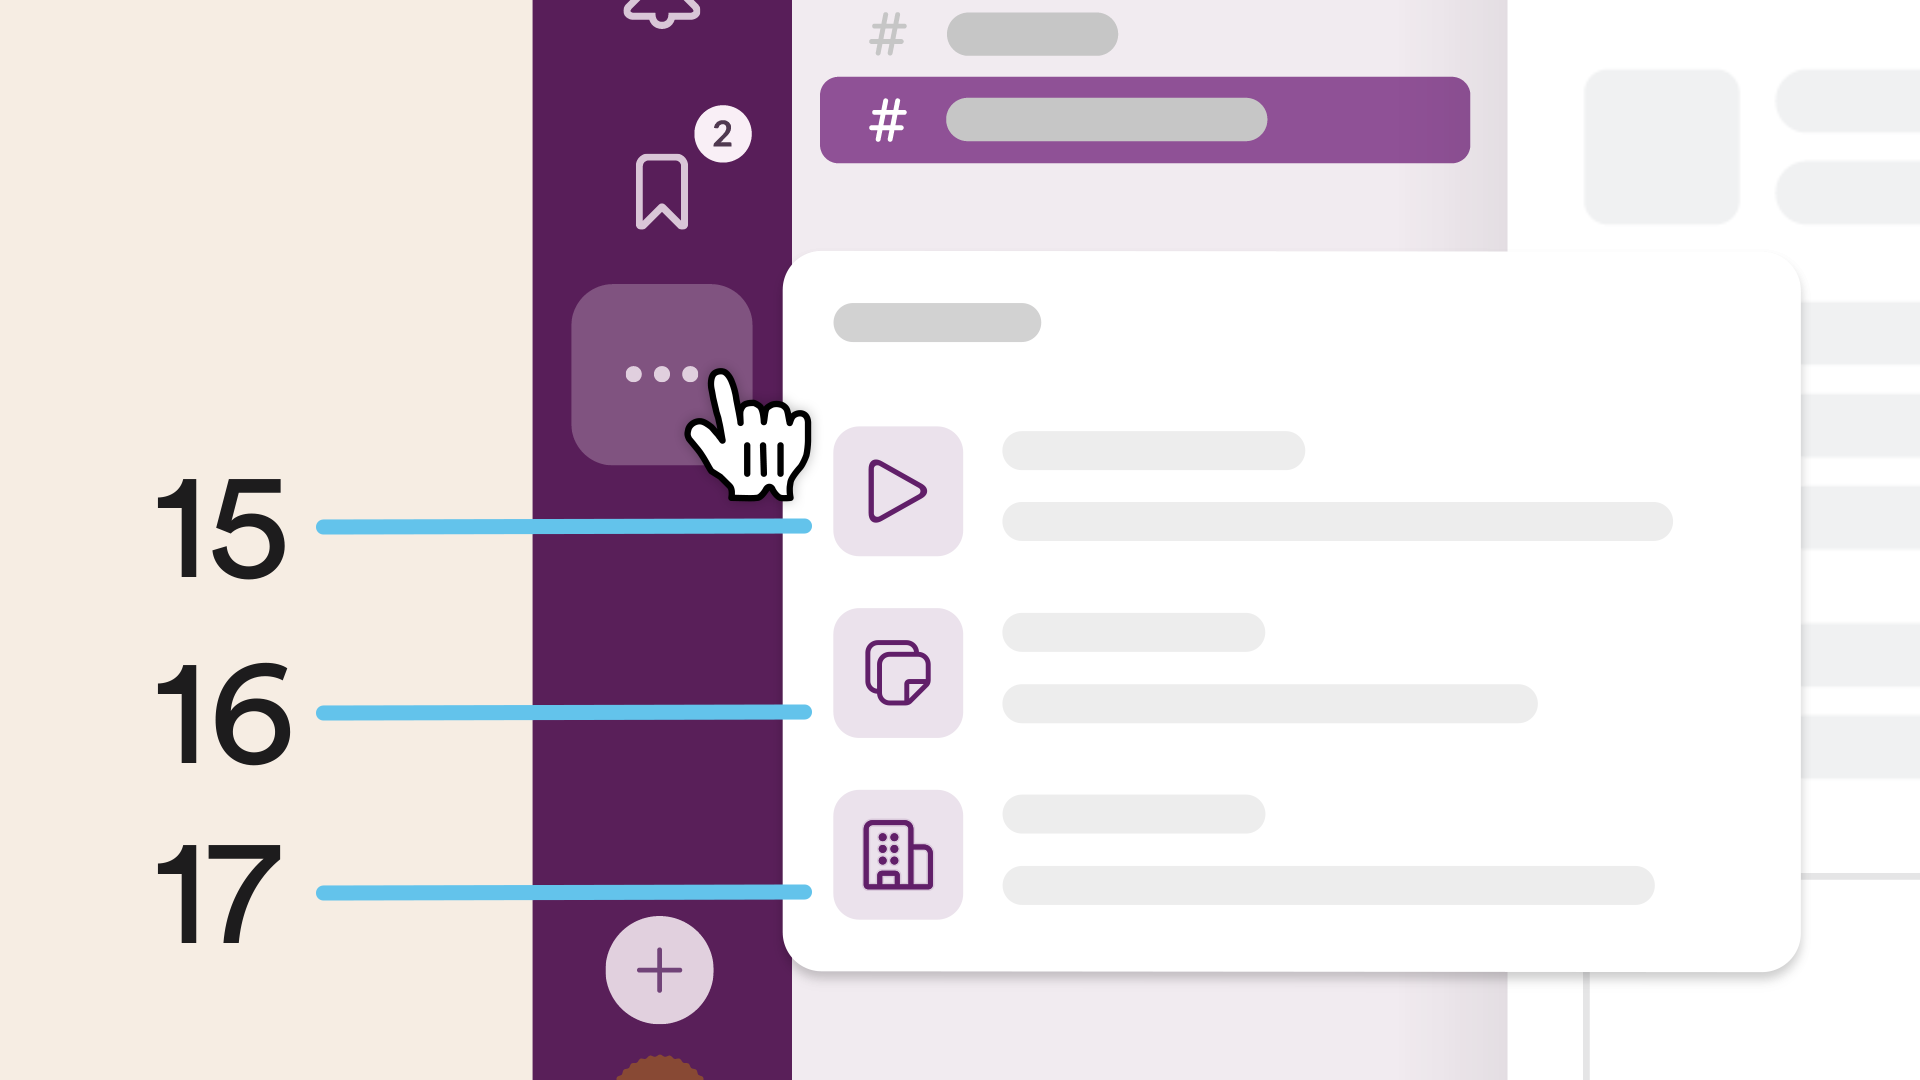 View of the Slack interface, including the automations, canvases, and external connections